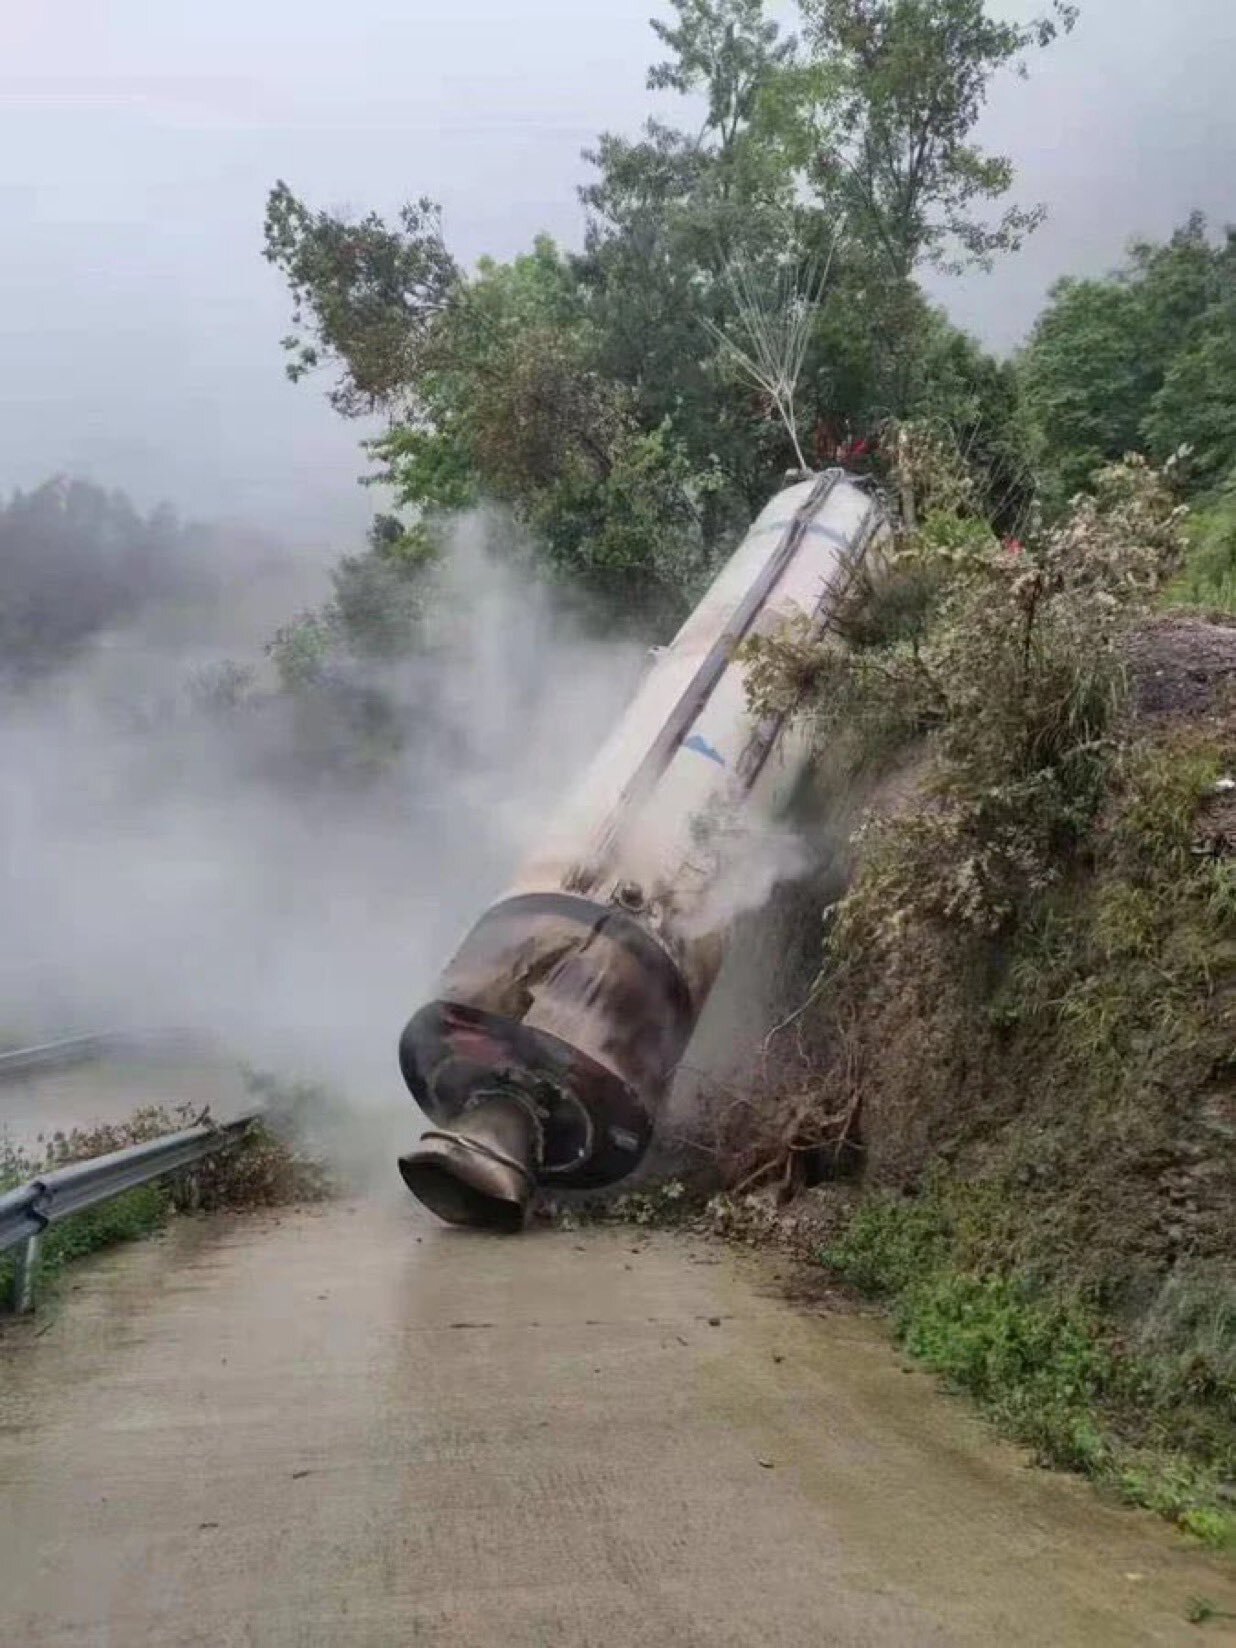 ”Damn poison”: Chinese rocket with toxic fuel crashed in populated area